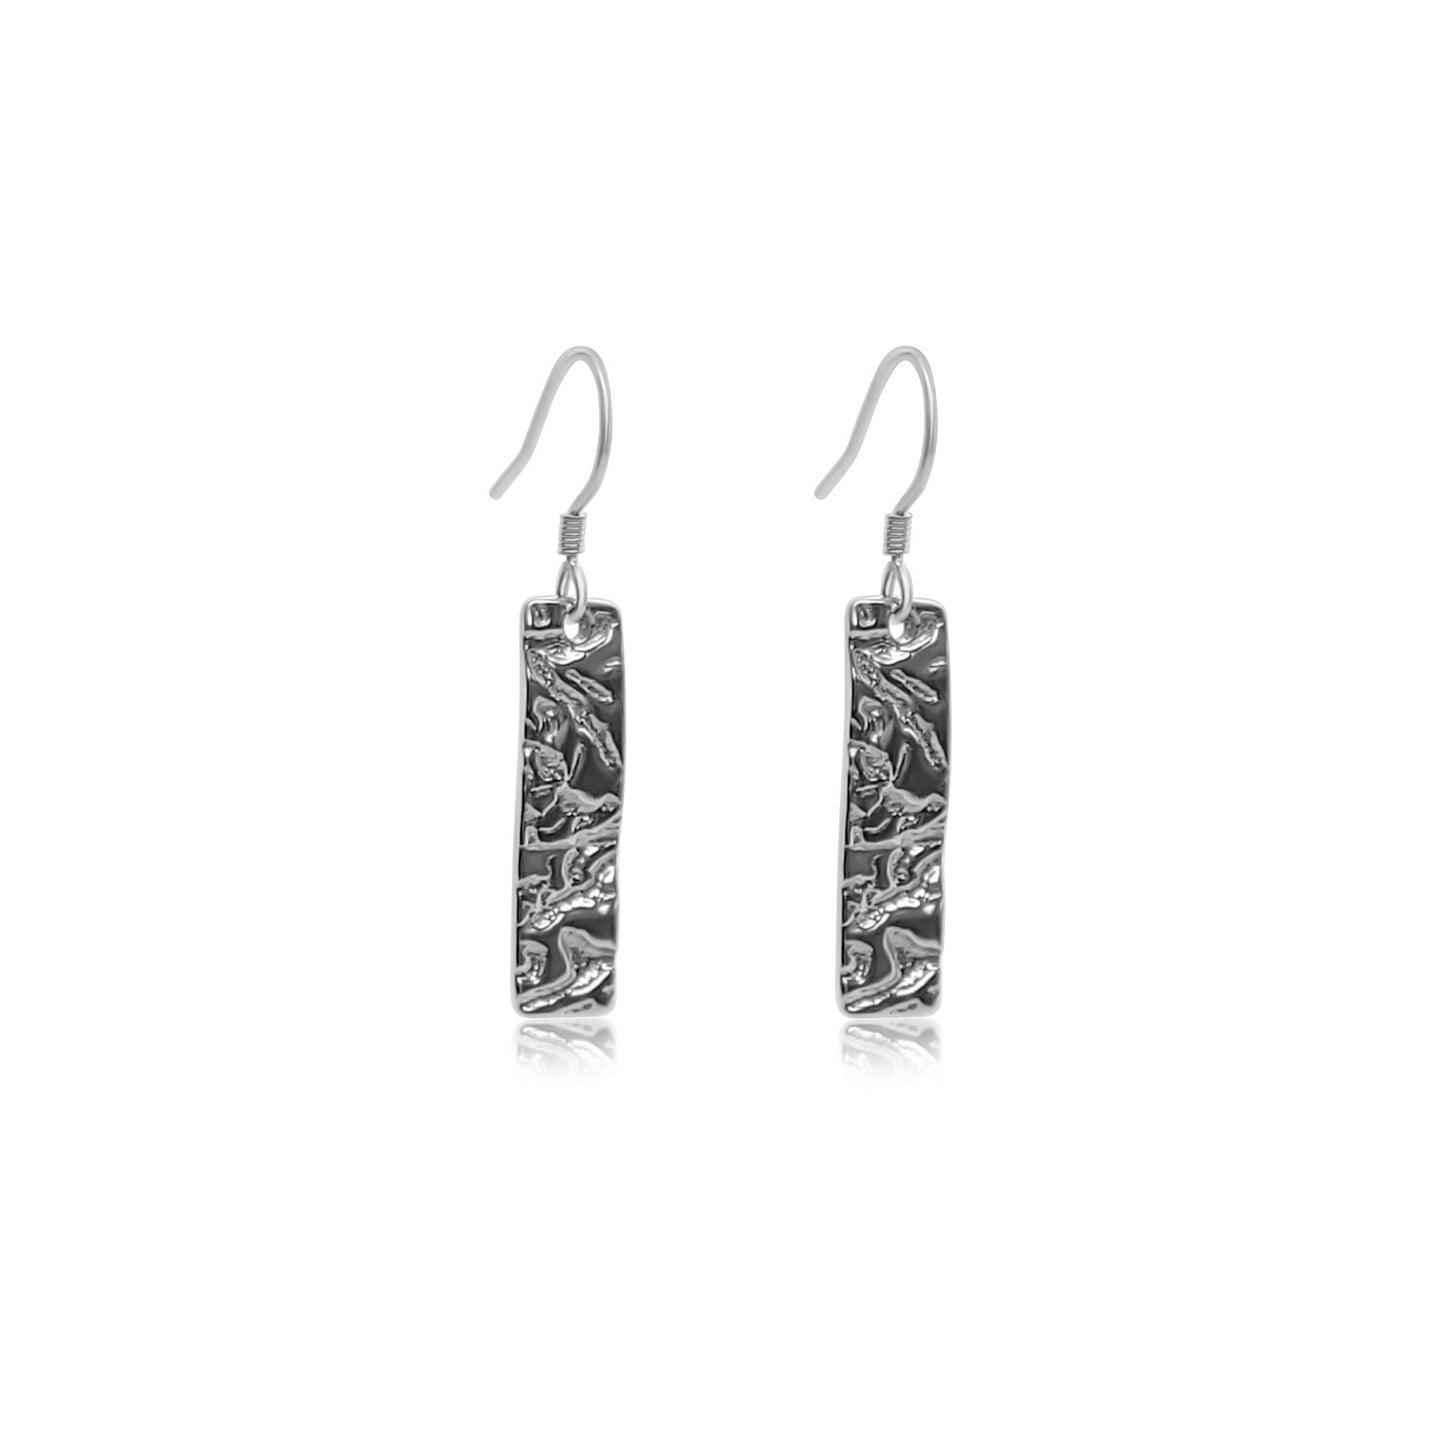 sterling silver drop earrings with thin rectangle pendant with a natural driftwood texture on the silver